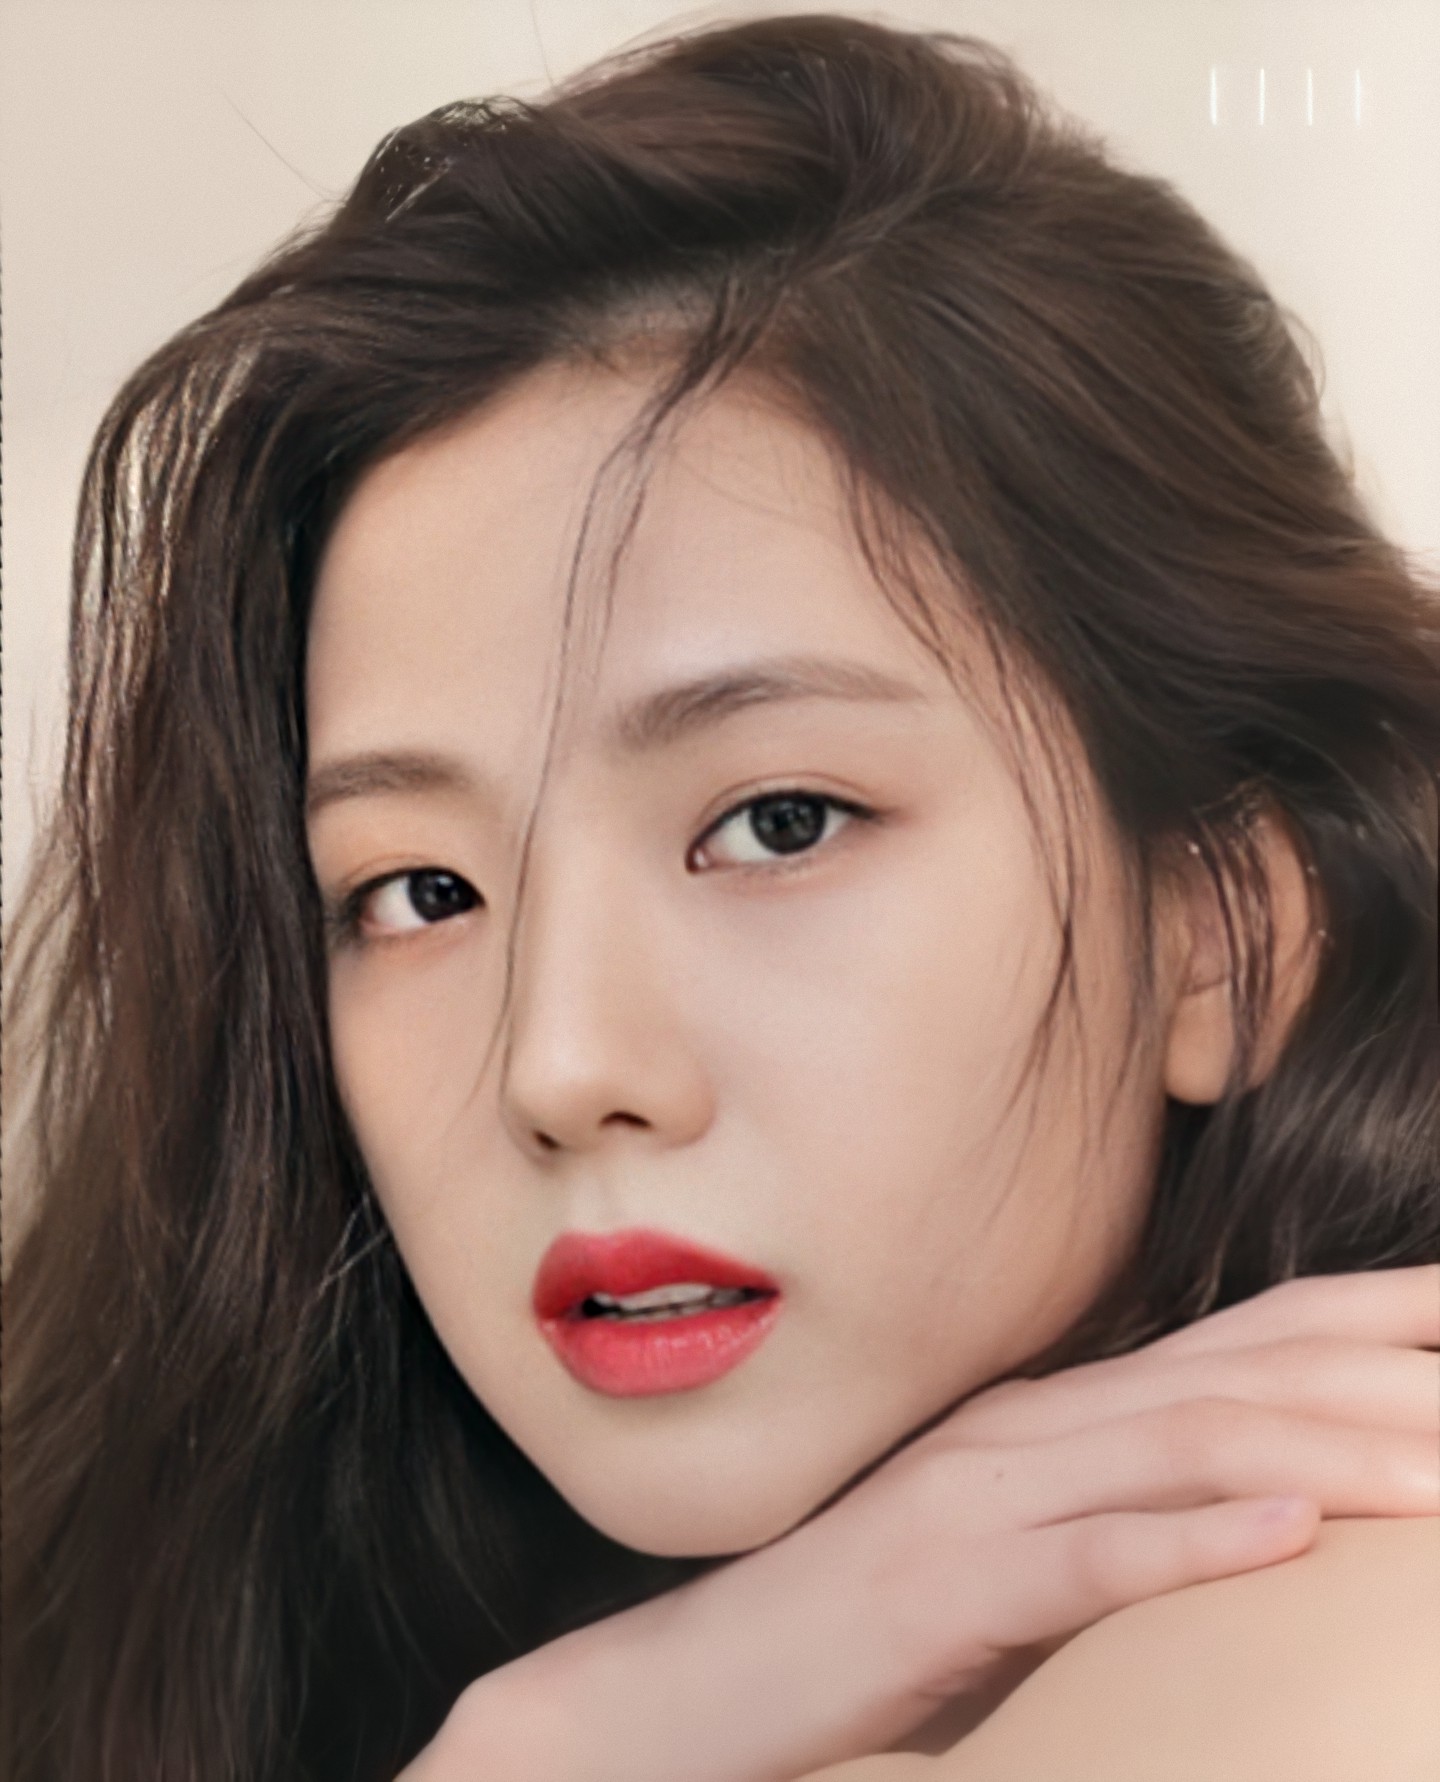 JISOO ranked #7 among the Top 10 Celebrity & Influencers in the World ...